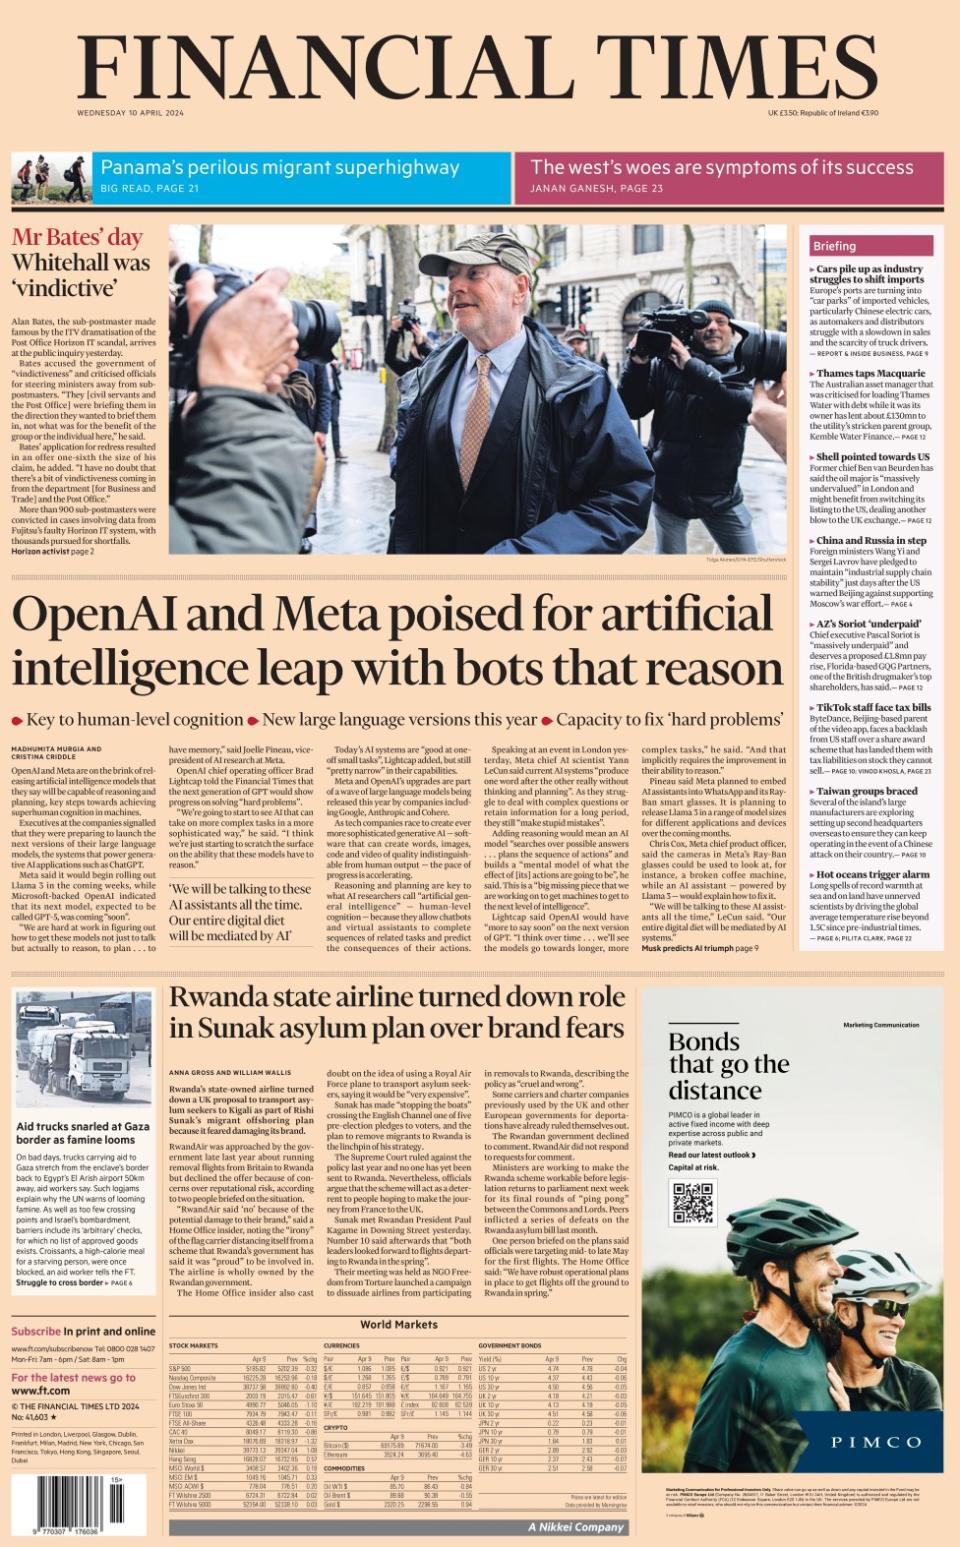 The headline in the Financial Times reads: OpenAI and Meta poised for artificial intelligence leap with bots that reason